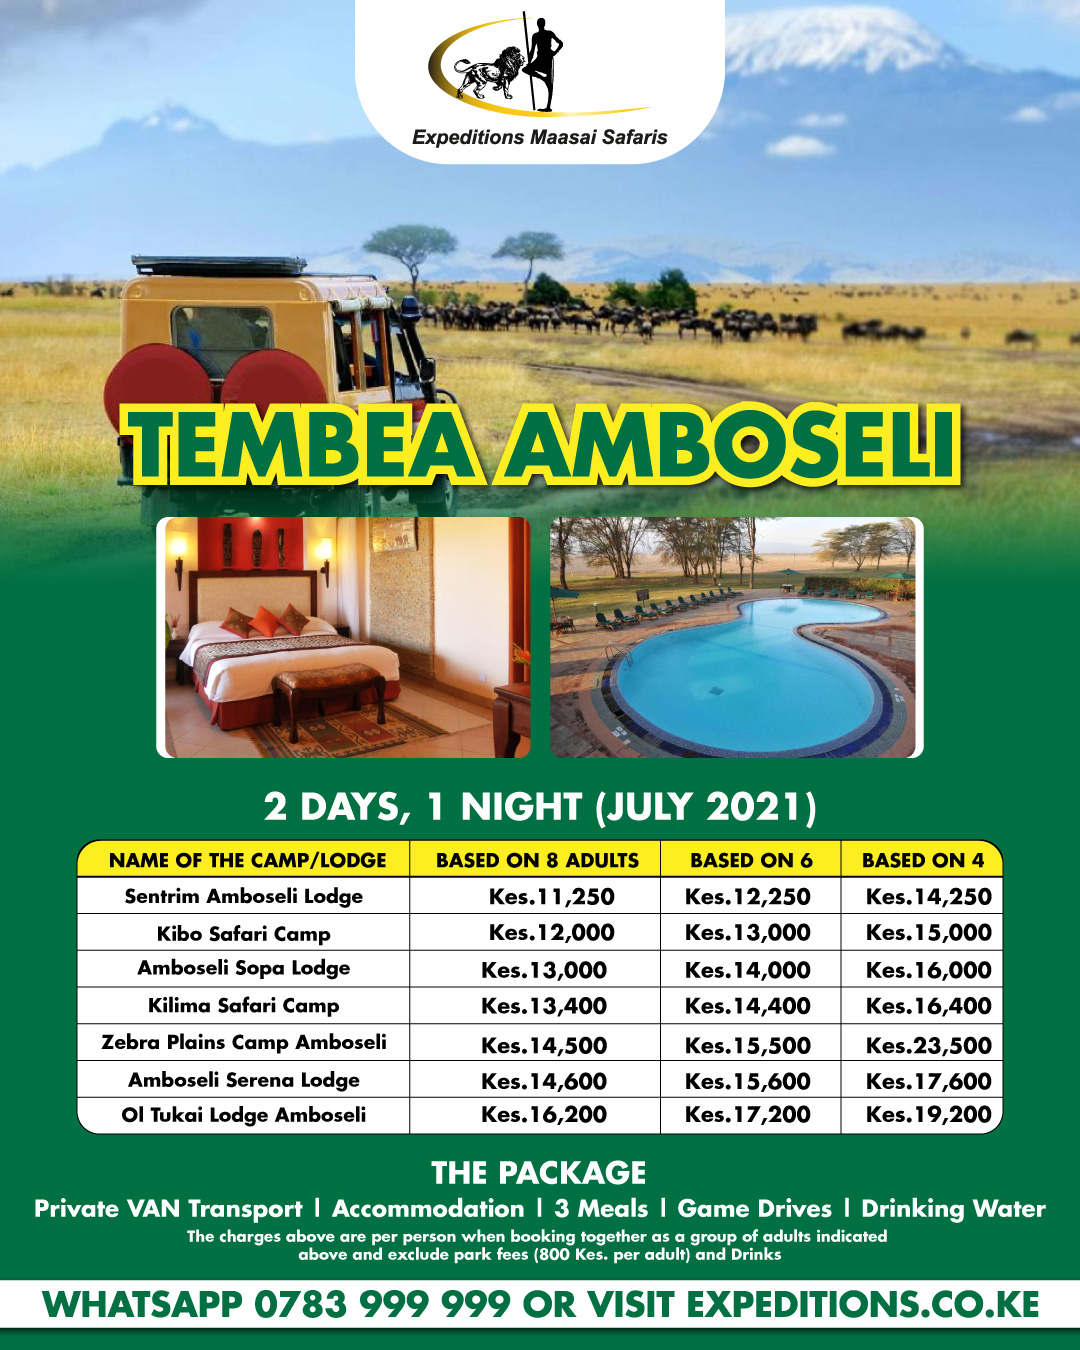 Explore the iconic Amboseli National Park with our 2 Days, 1 Night Amboseli Safari Packages!